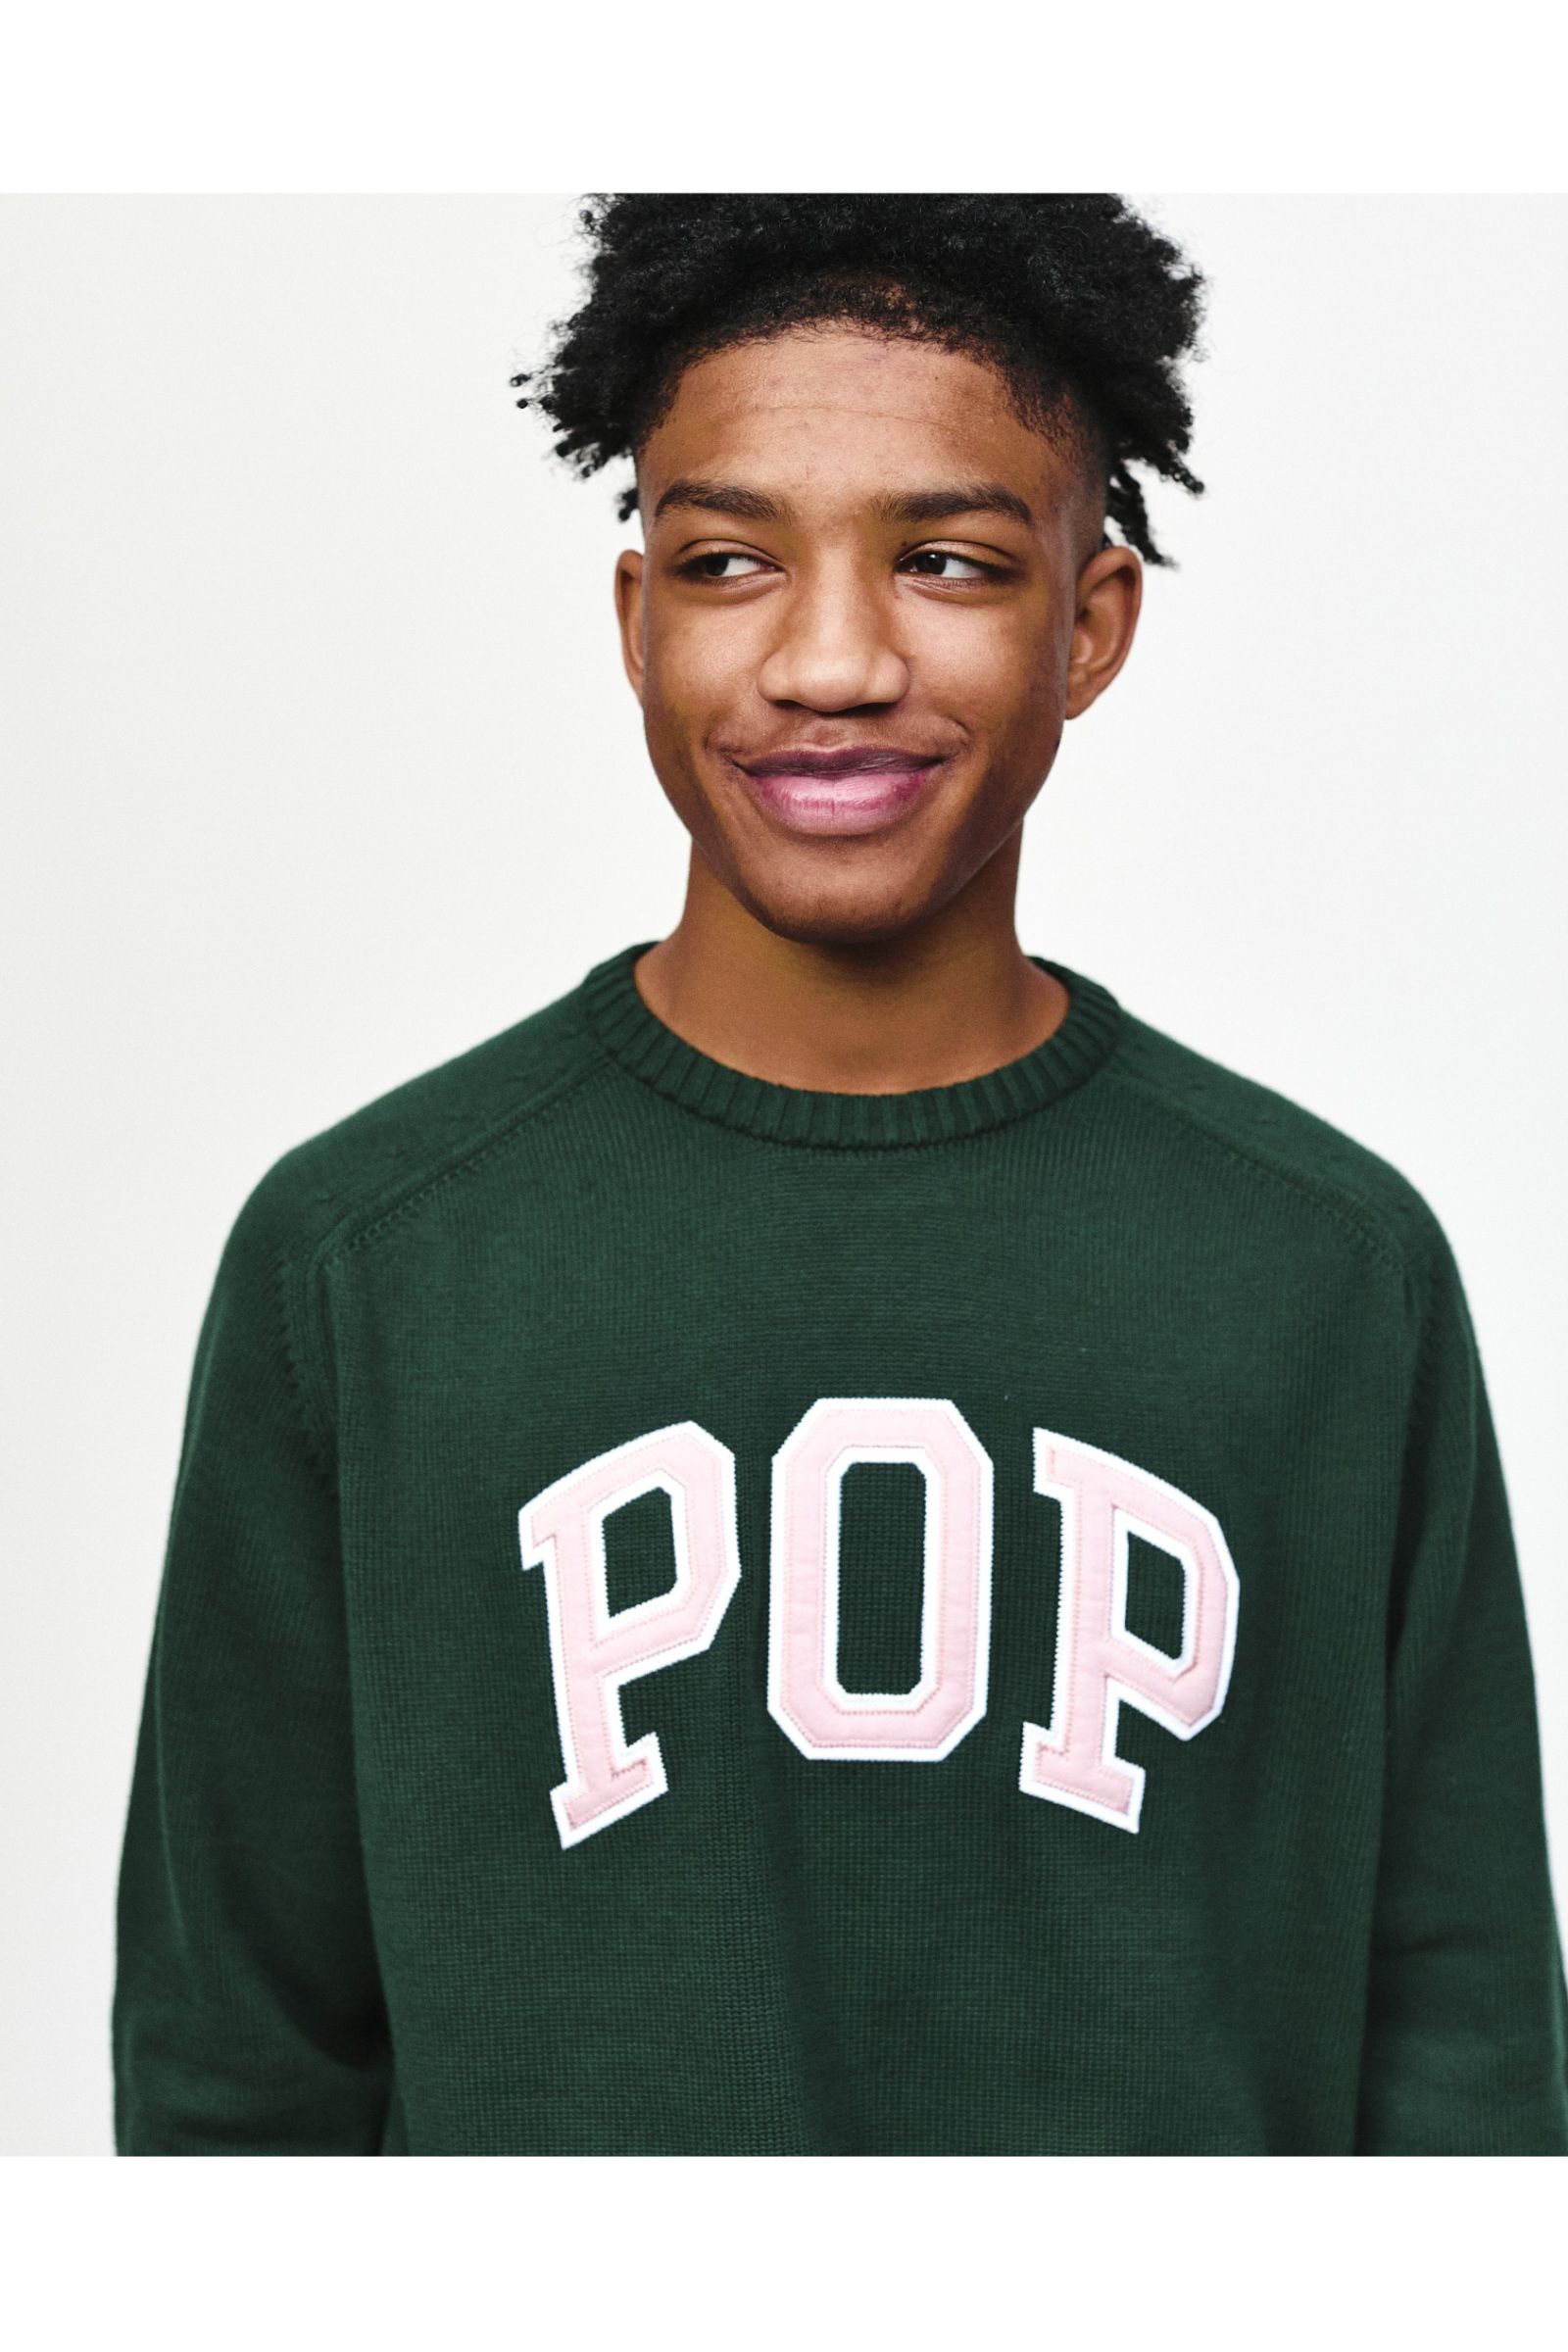 Pop Trading Company - arch knitted crewneck 21aw | asterisk